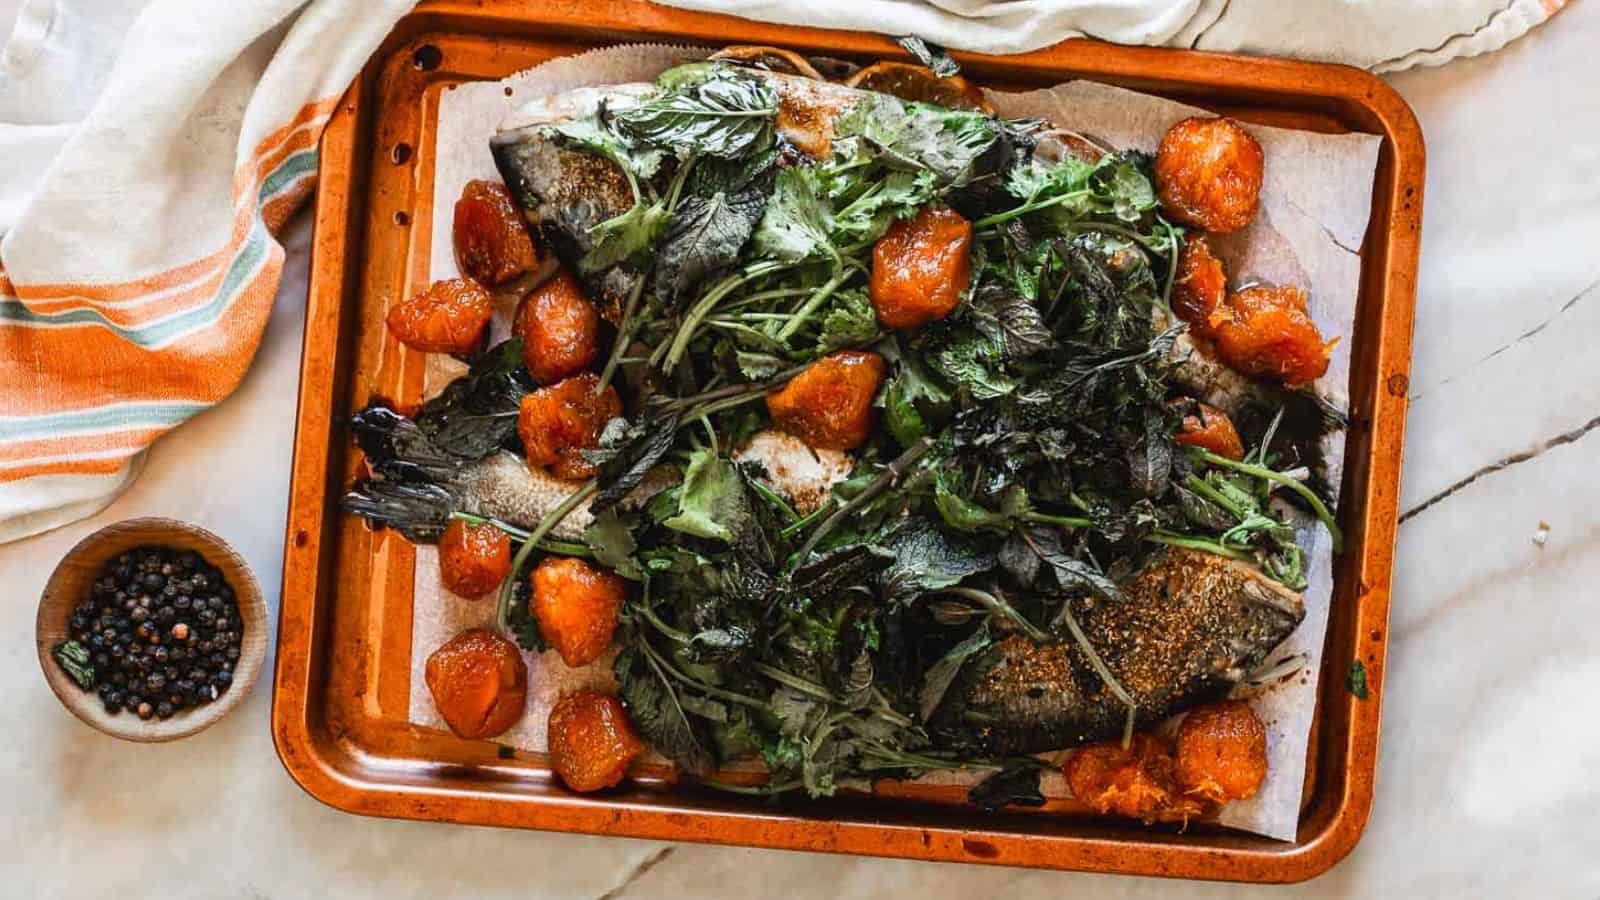 A baking sheet with fish and greens on it.